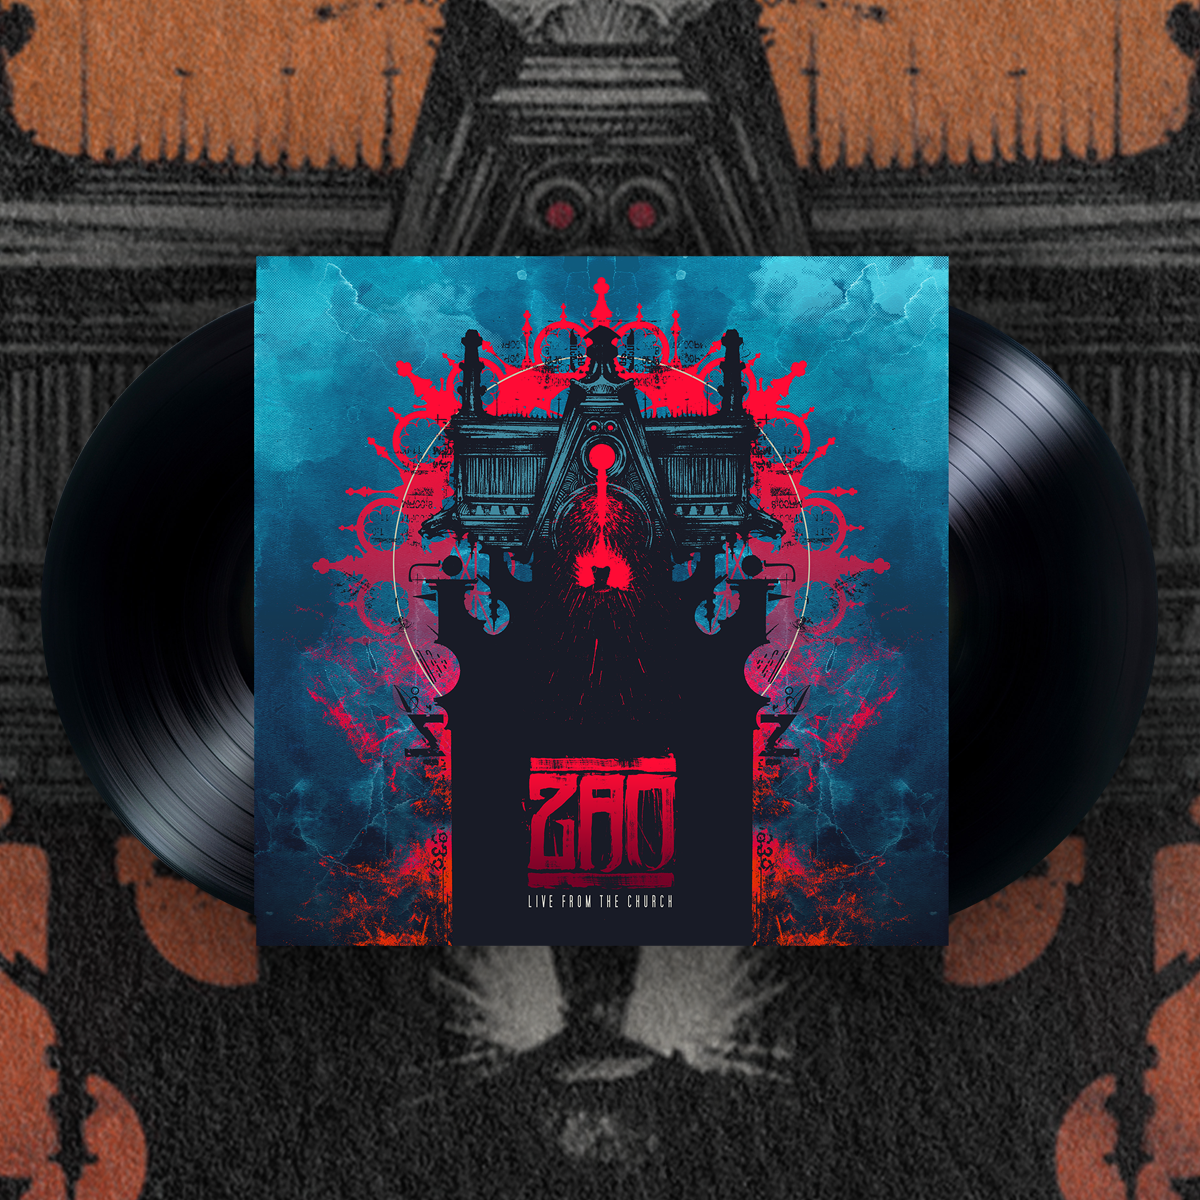 ZAO "LIVE FROM THE CHURCH" Limited Edition 2LP Black Vinyl (PRE-ORDER)